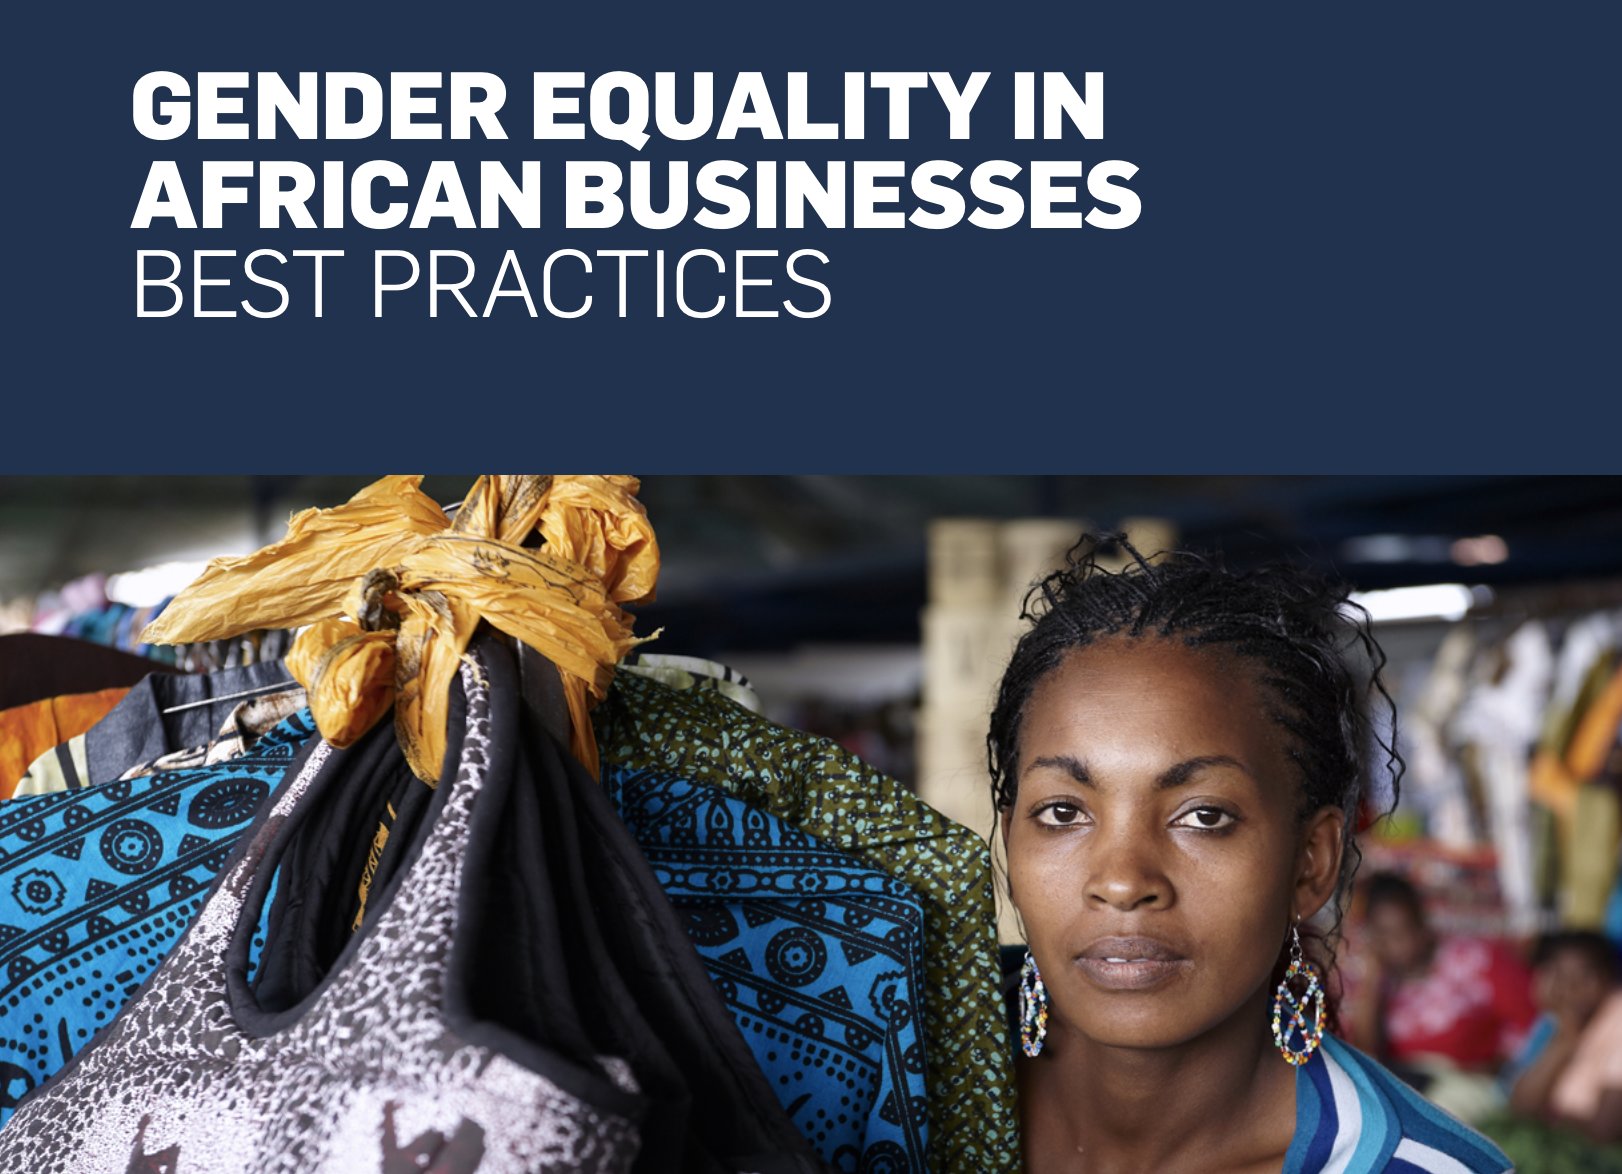 Gender Equality in African Businesses Best Practices